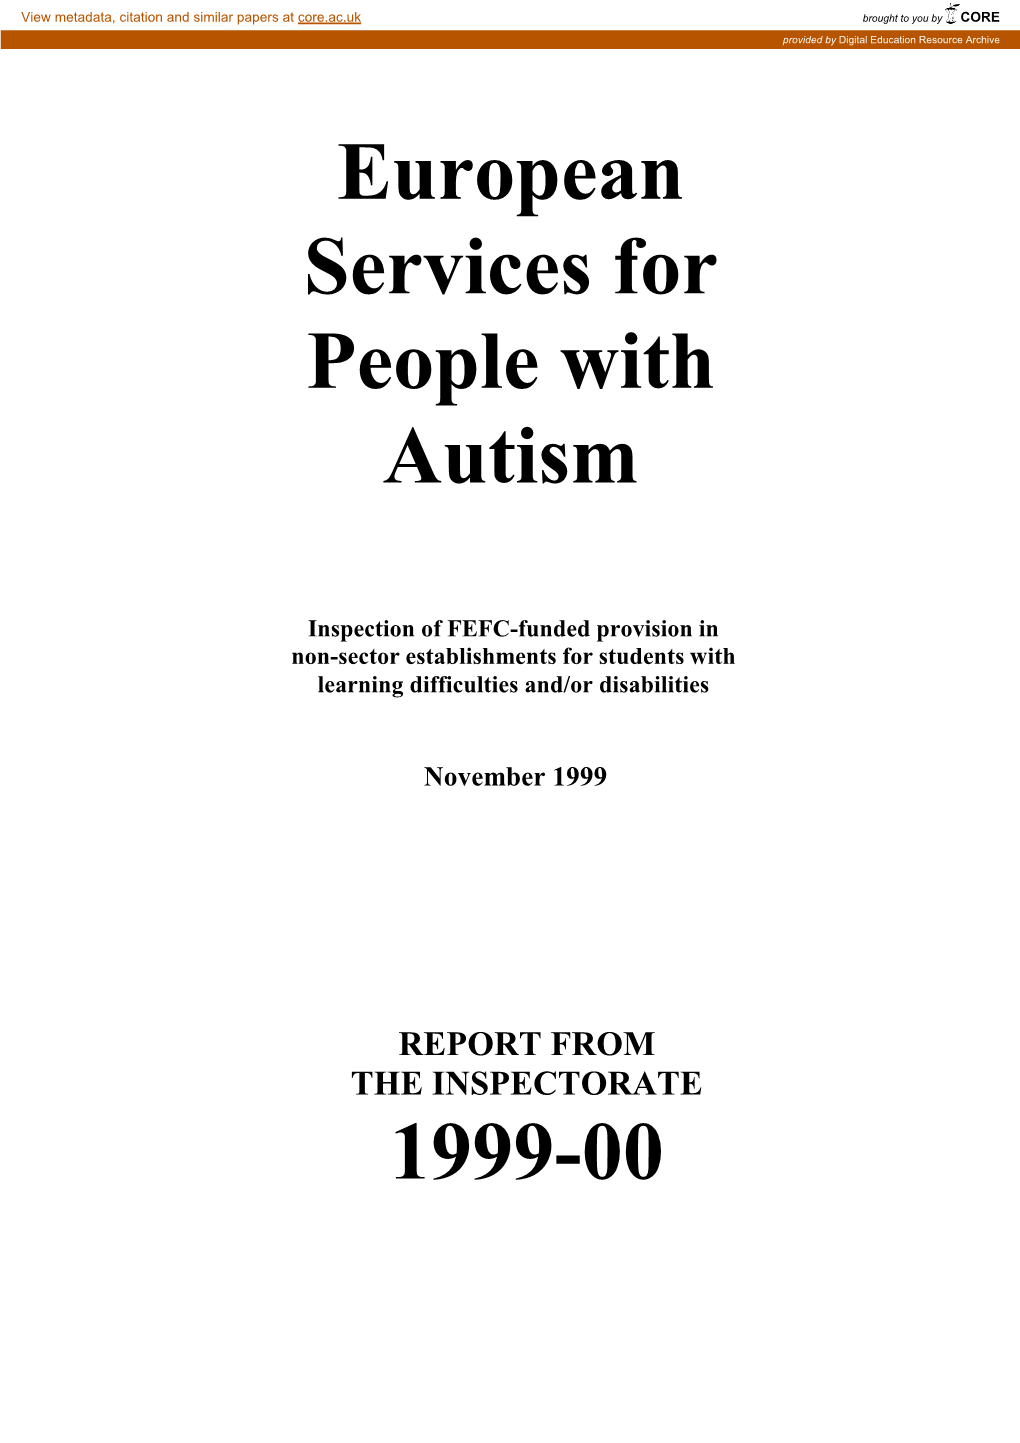 European Services for People with Autism